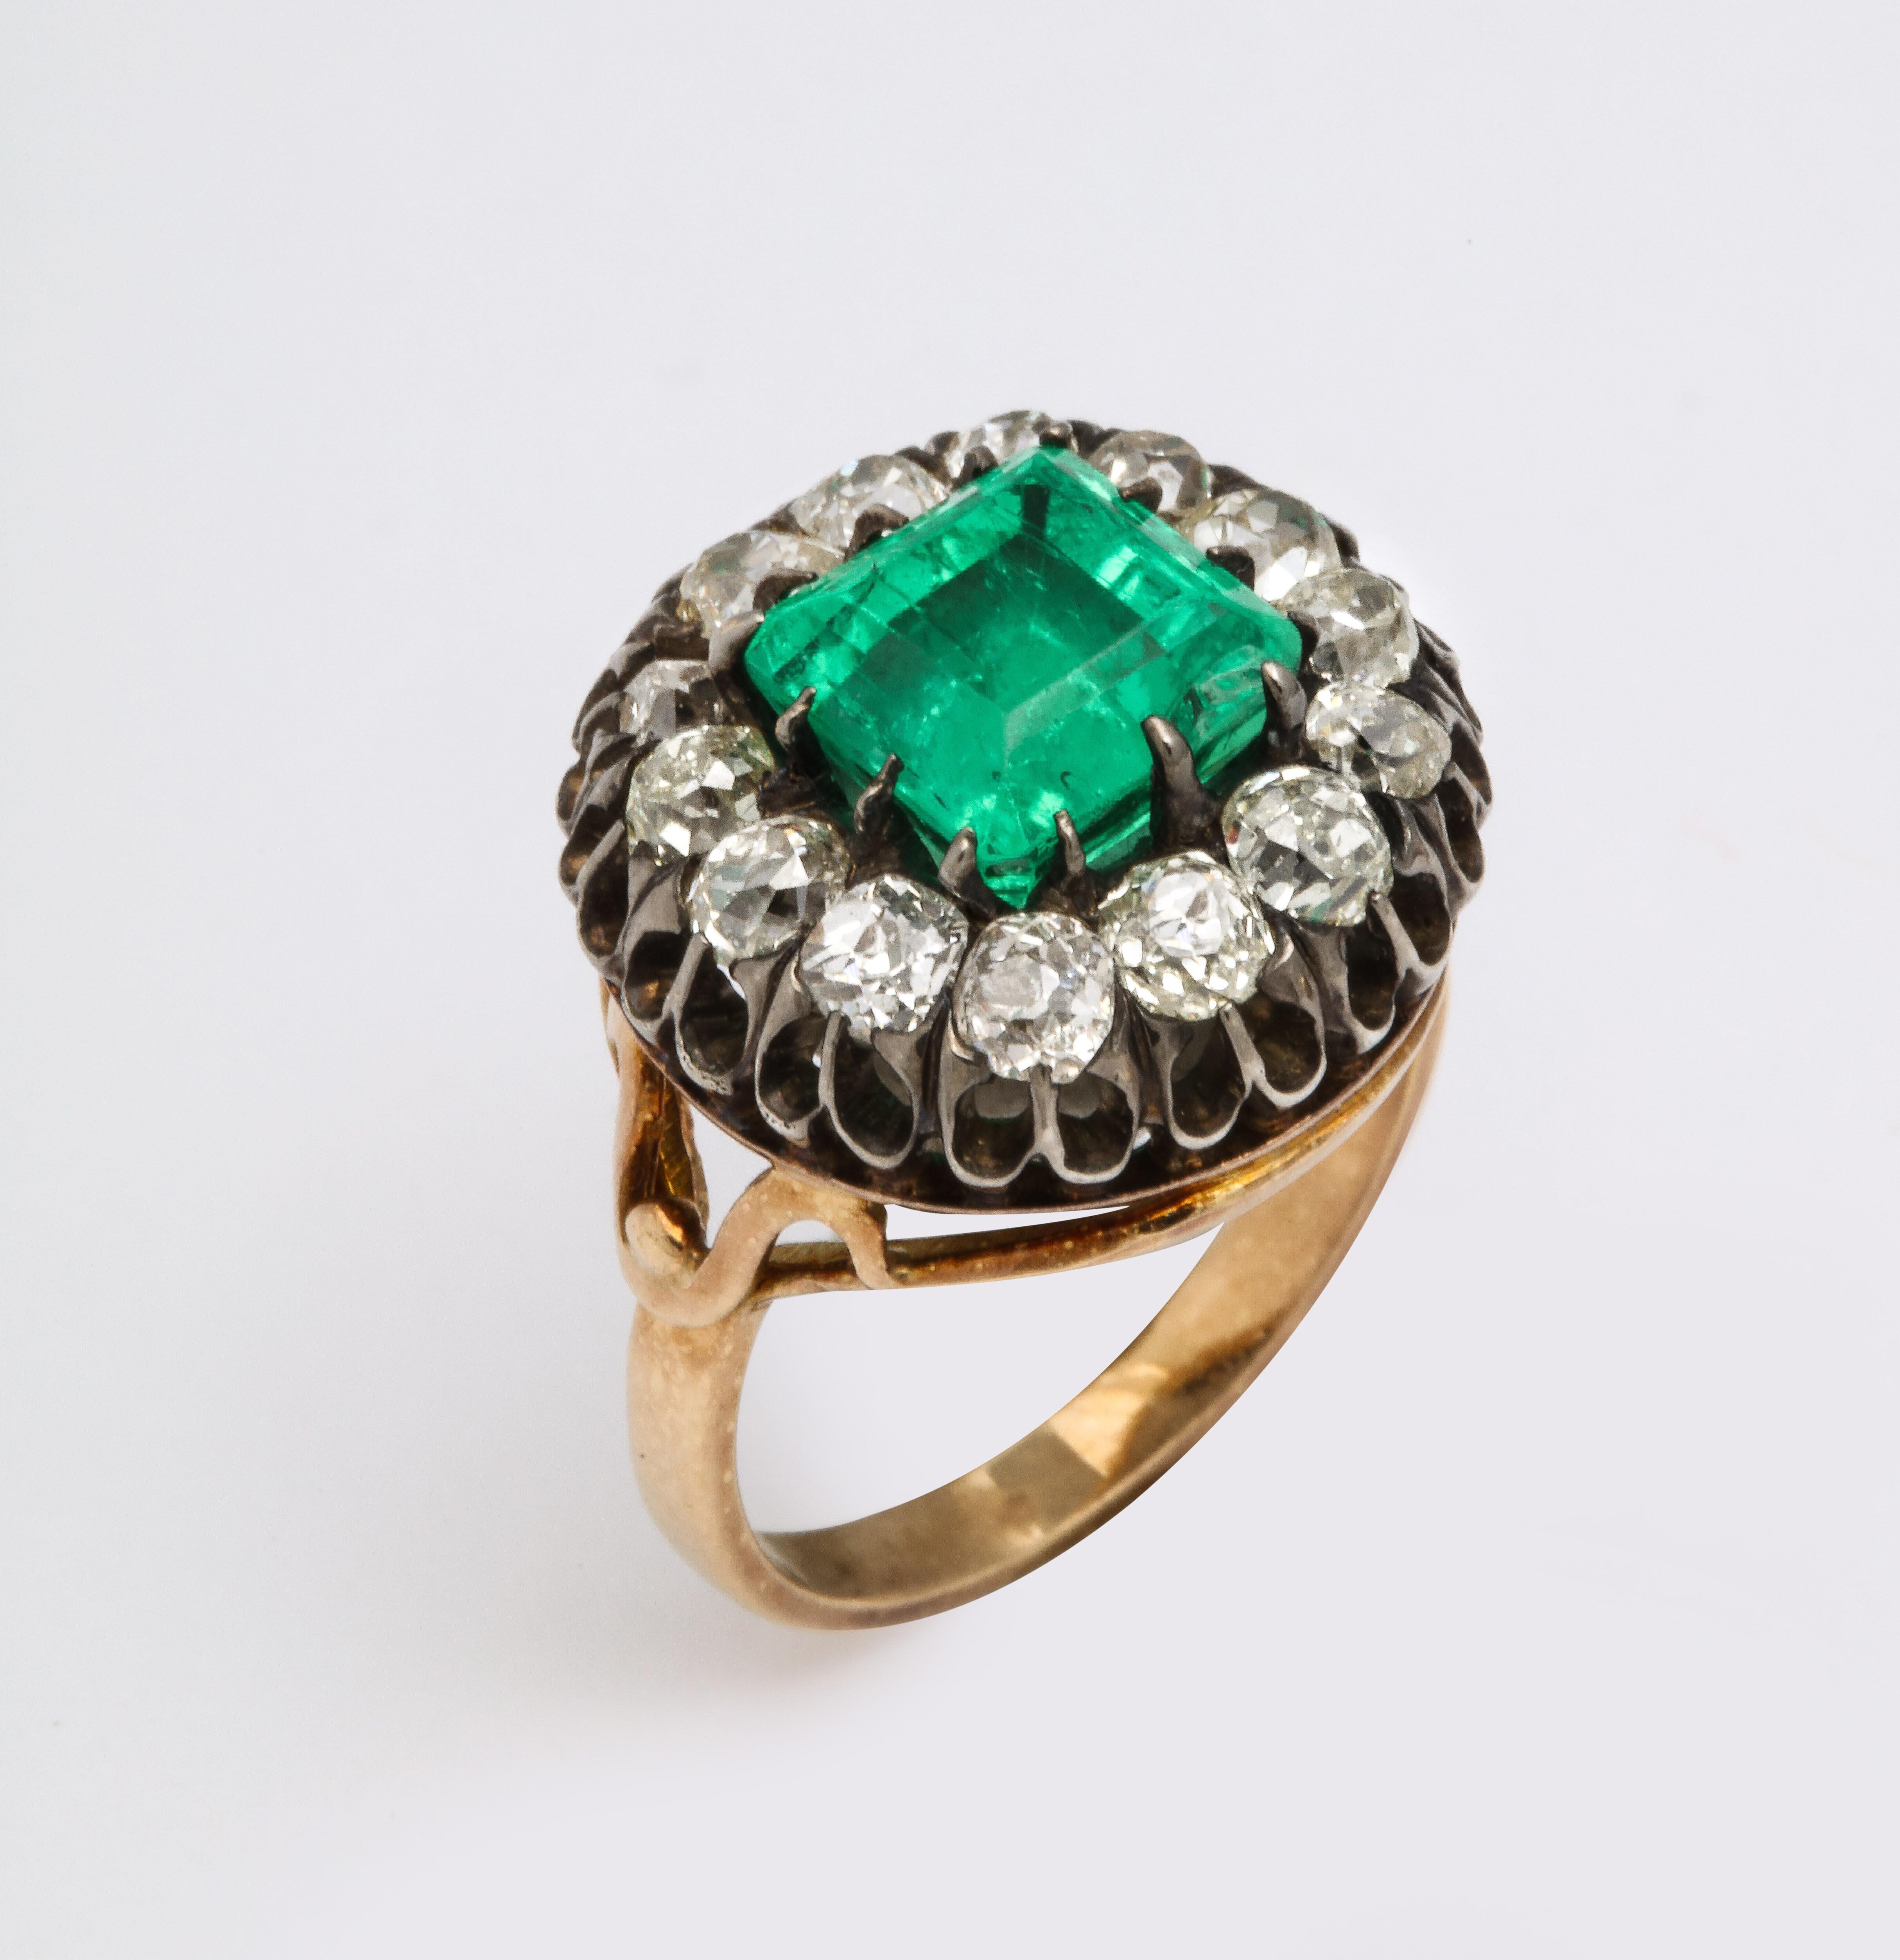 This Antique Square Cut Emerald and Old Mine Diamond ring is a rare find.  The Colombian Emerald is surrounded by fine old mine cut diamonds set in yellow and white 18K gold. 
iIt is elegant and charming and looks great on the hand.  GIA certificate